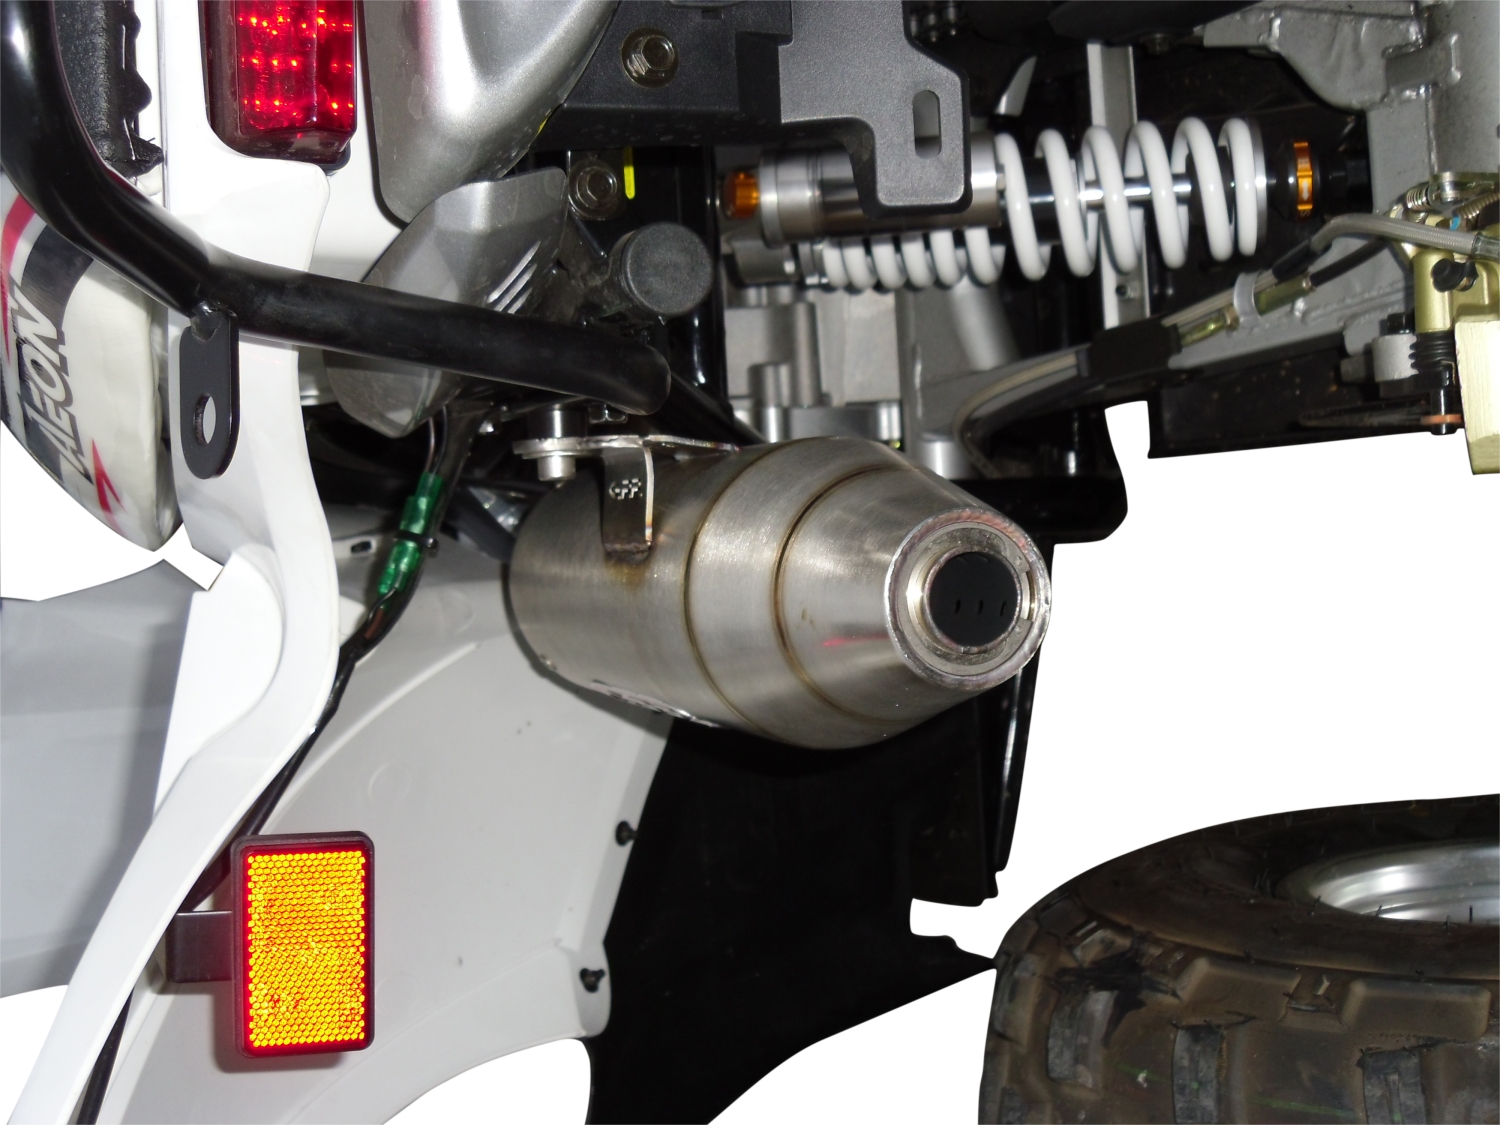 Exhaust system compatible with Access Supermoto 450 2005-2021, Deeptone Atv, Homologated legal slip-on exhaust including removable db killer and link pipe 